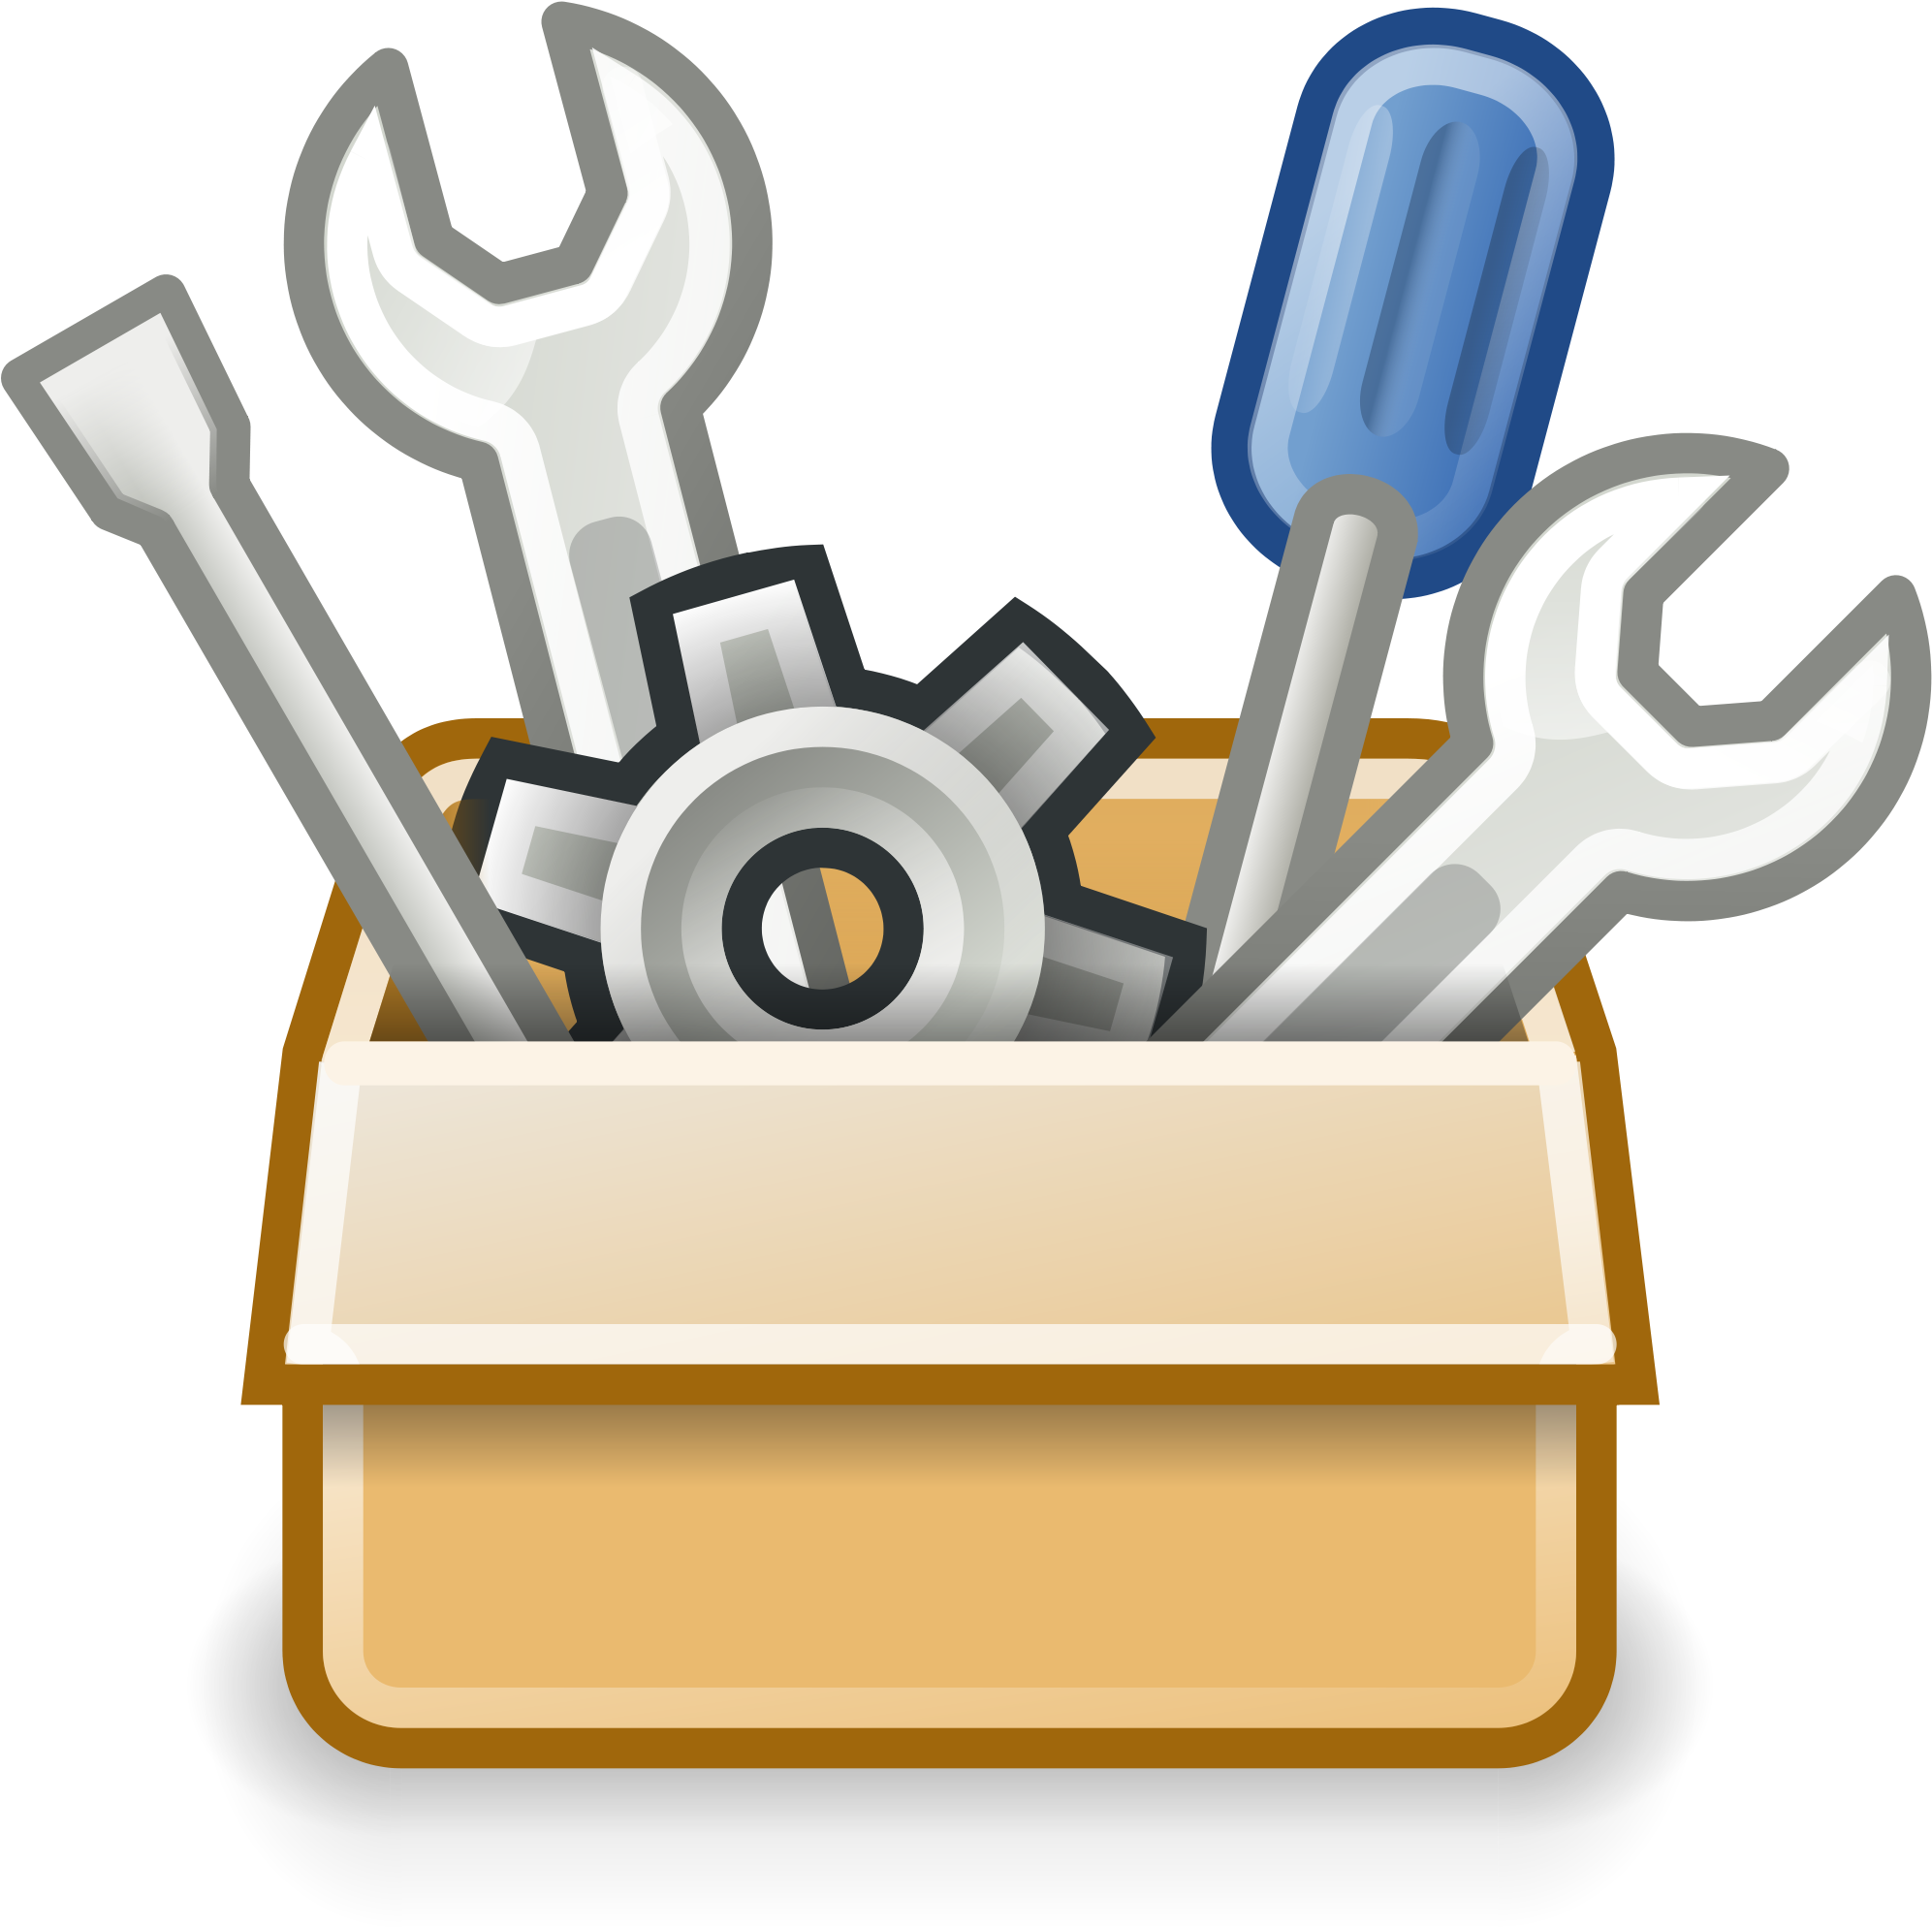 Gnome Preferences - Tools Software (2000x2000)